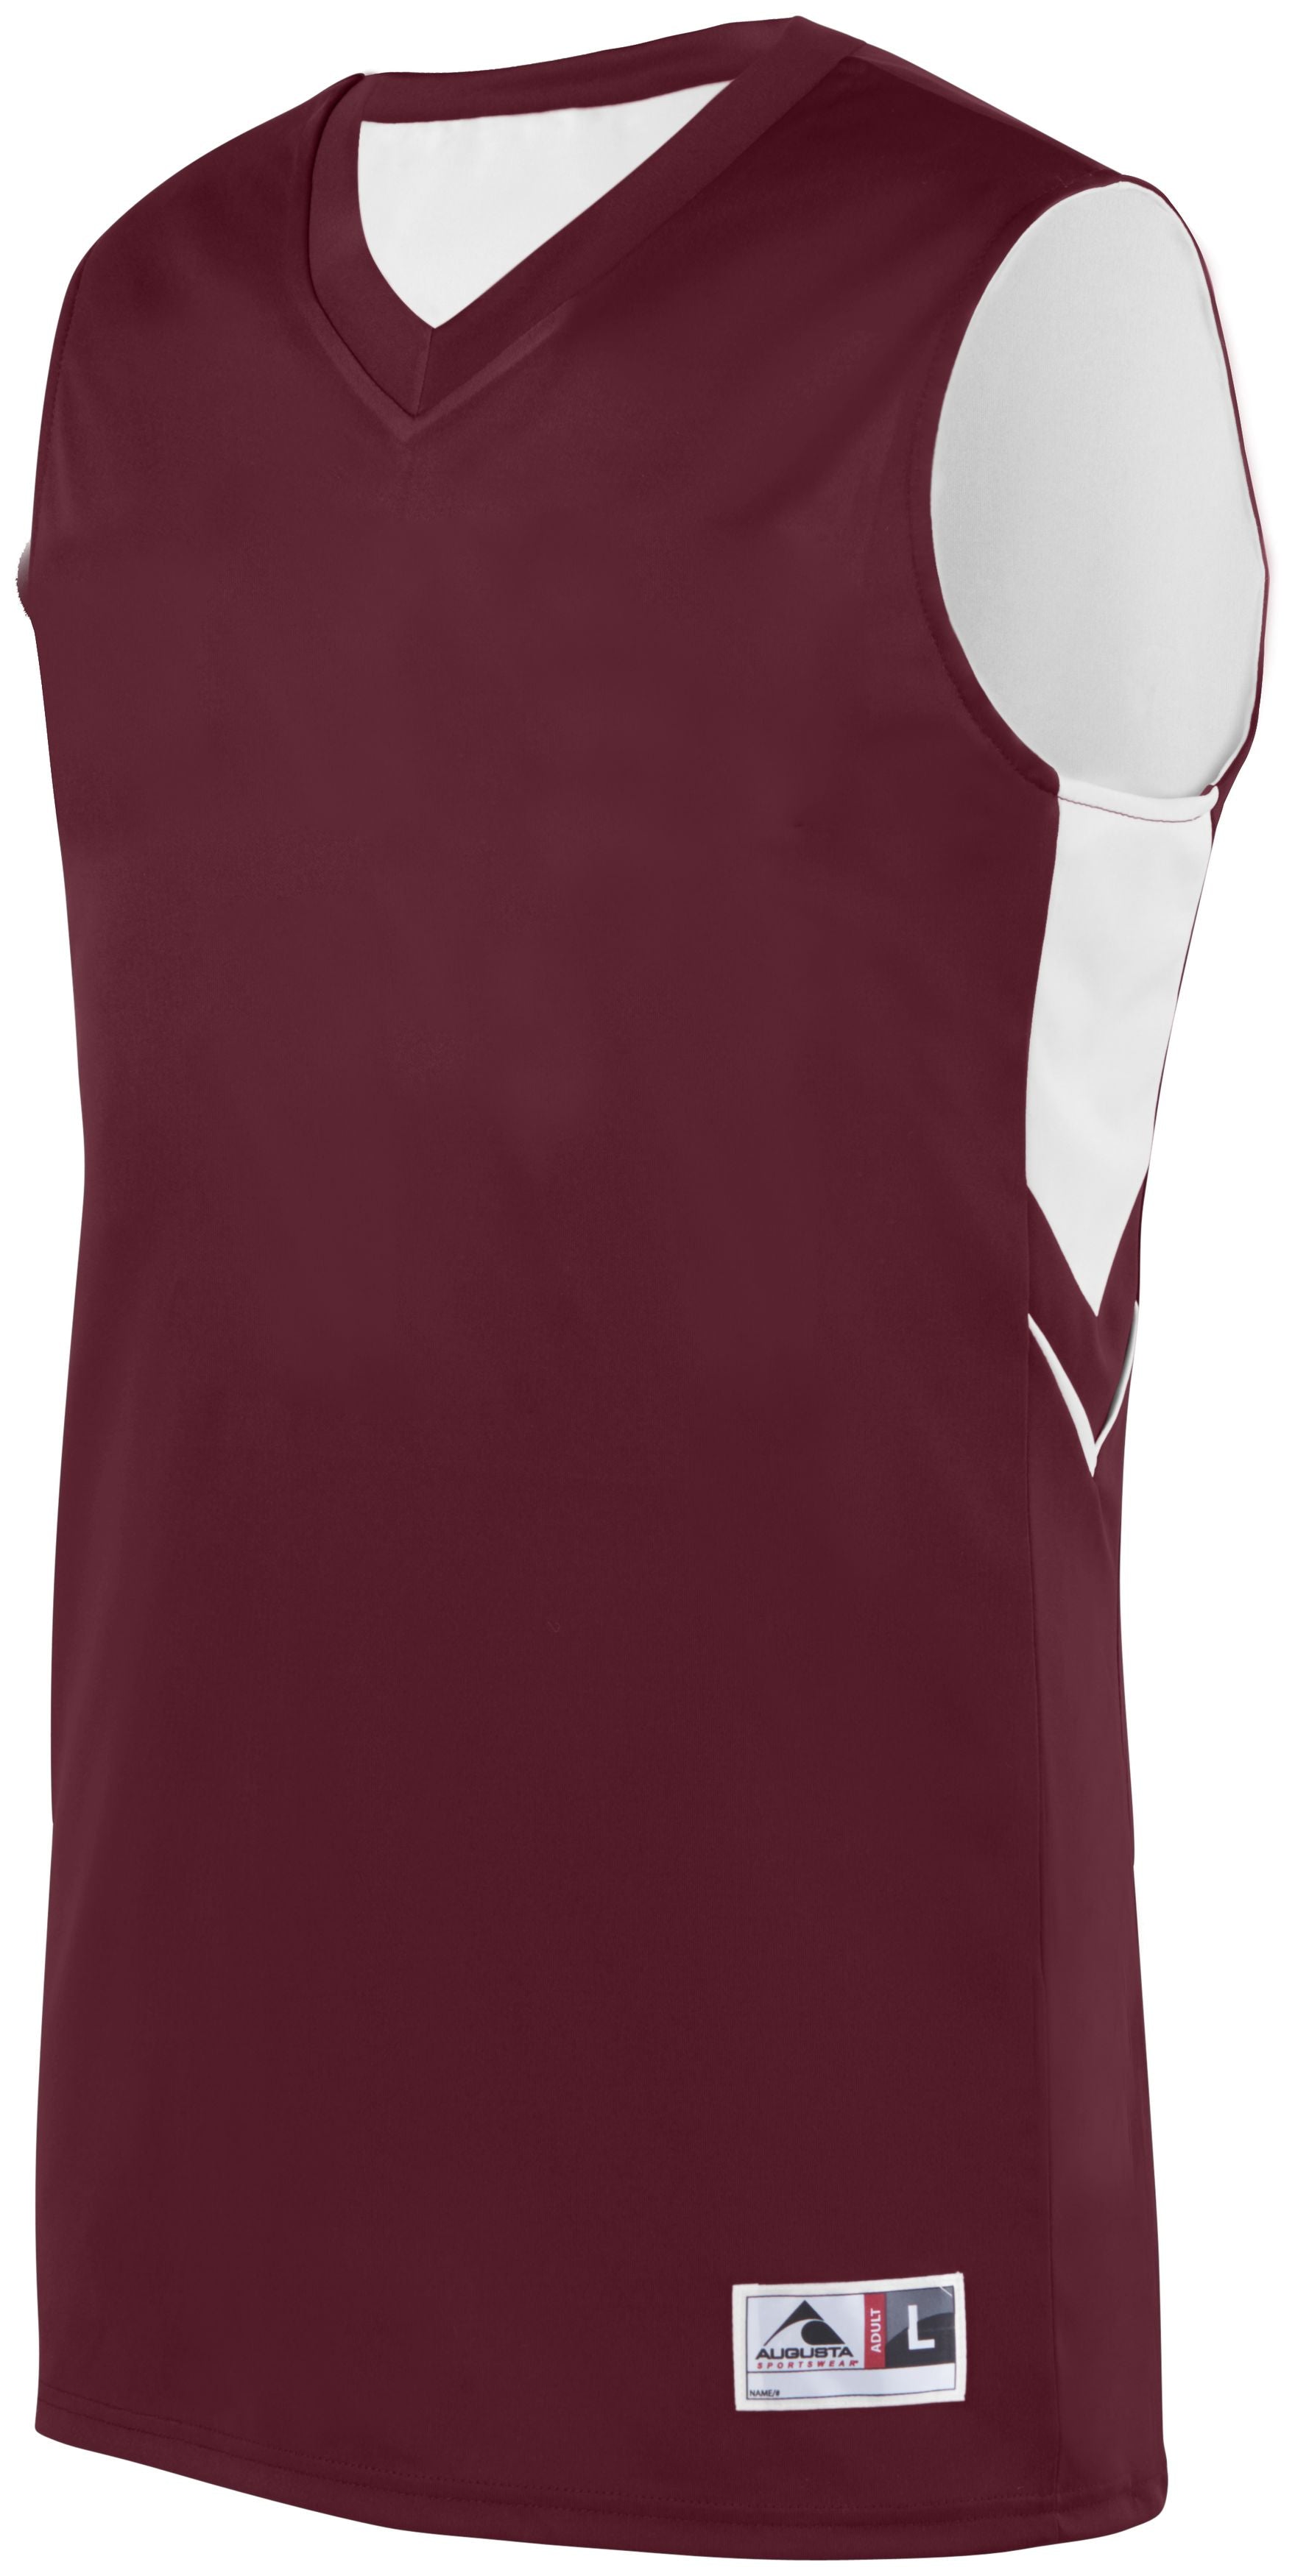 Augusta Sportswear Youth Alley-Oop Reversible Jersey in Maroon/White  -Part of the Youth, Youth-Jersey, Augusta-Products, Basketball, Shirts, All-Sports, All-Sports-1 product lines at KanaleyCreations.com